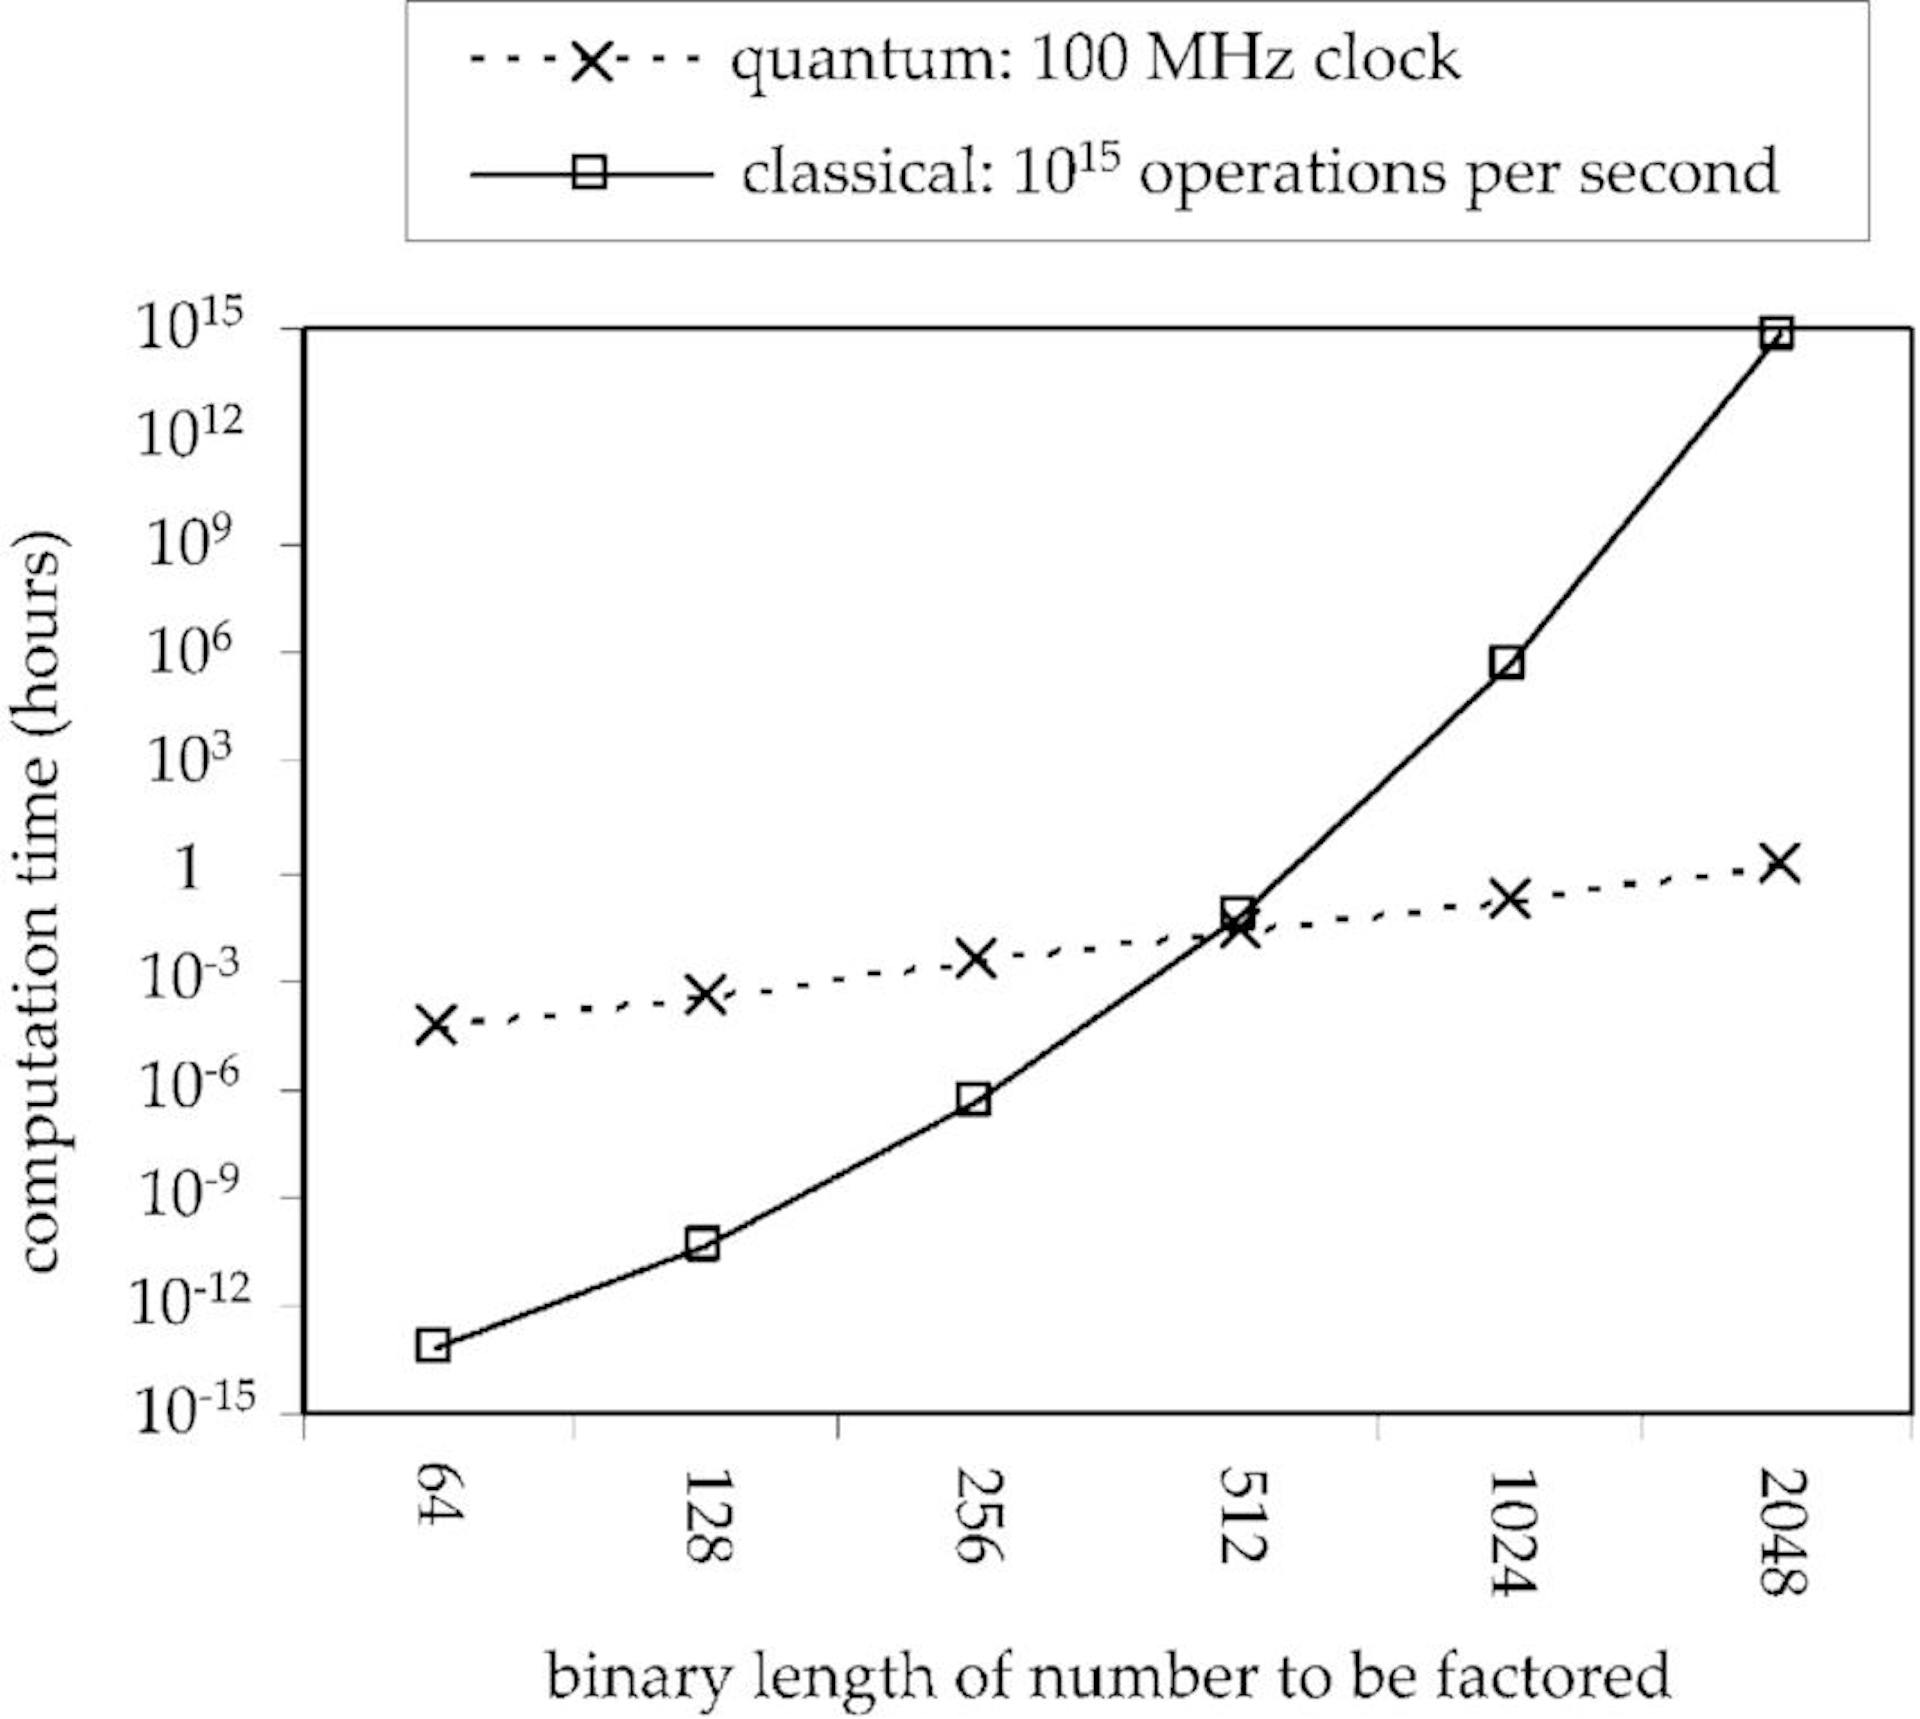 Nguồn - https://www.researchgate.net/figure/Comparison-of-estimated-computation-time-in-hours-for-the-problem-of-factoring-numbers-of_fig1_2986358